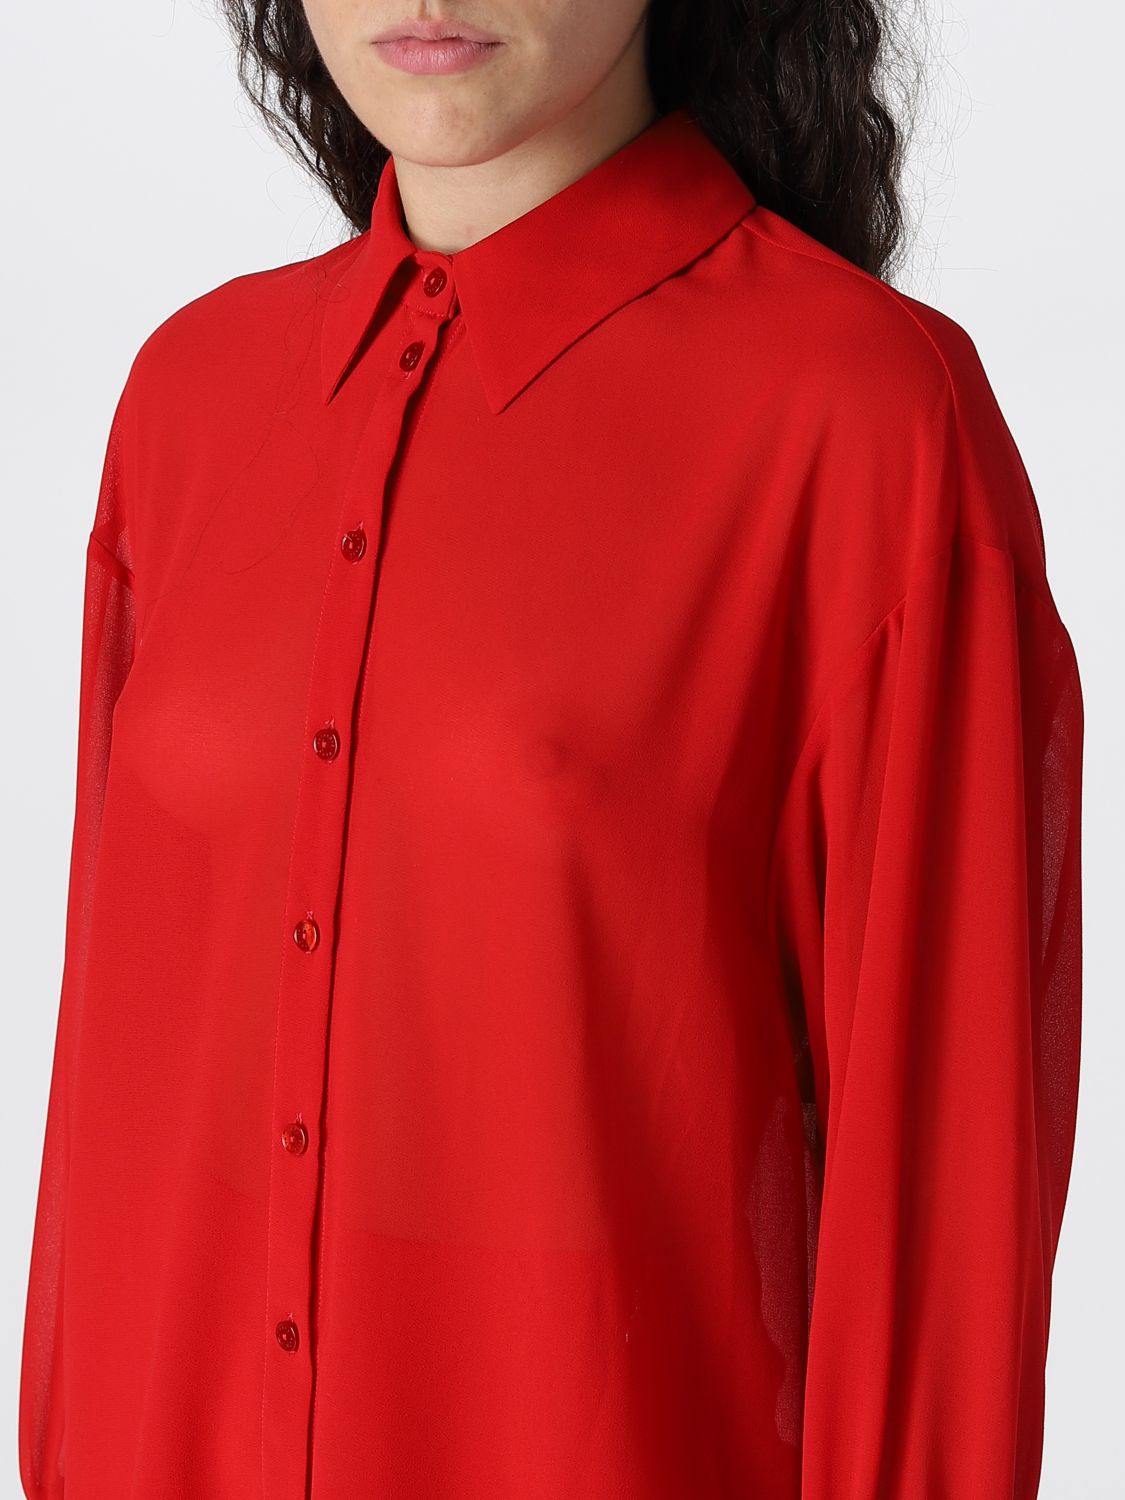 Chemise Patrizia Pepe: Chemise Patrizia Pepe femme rouge 3